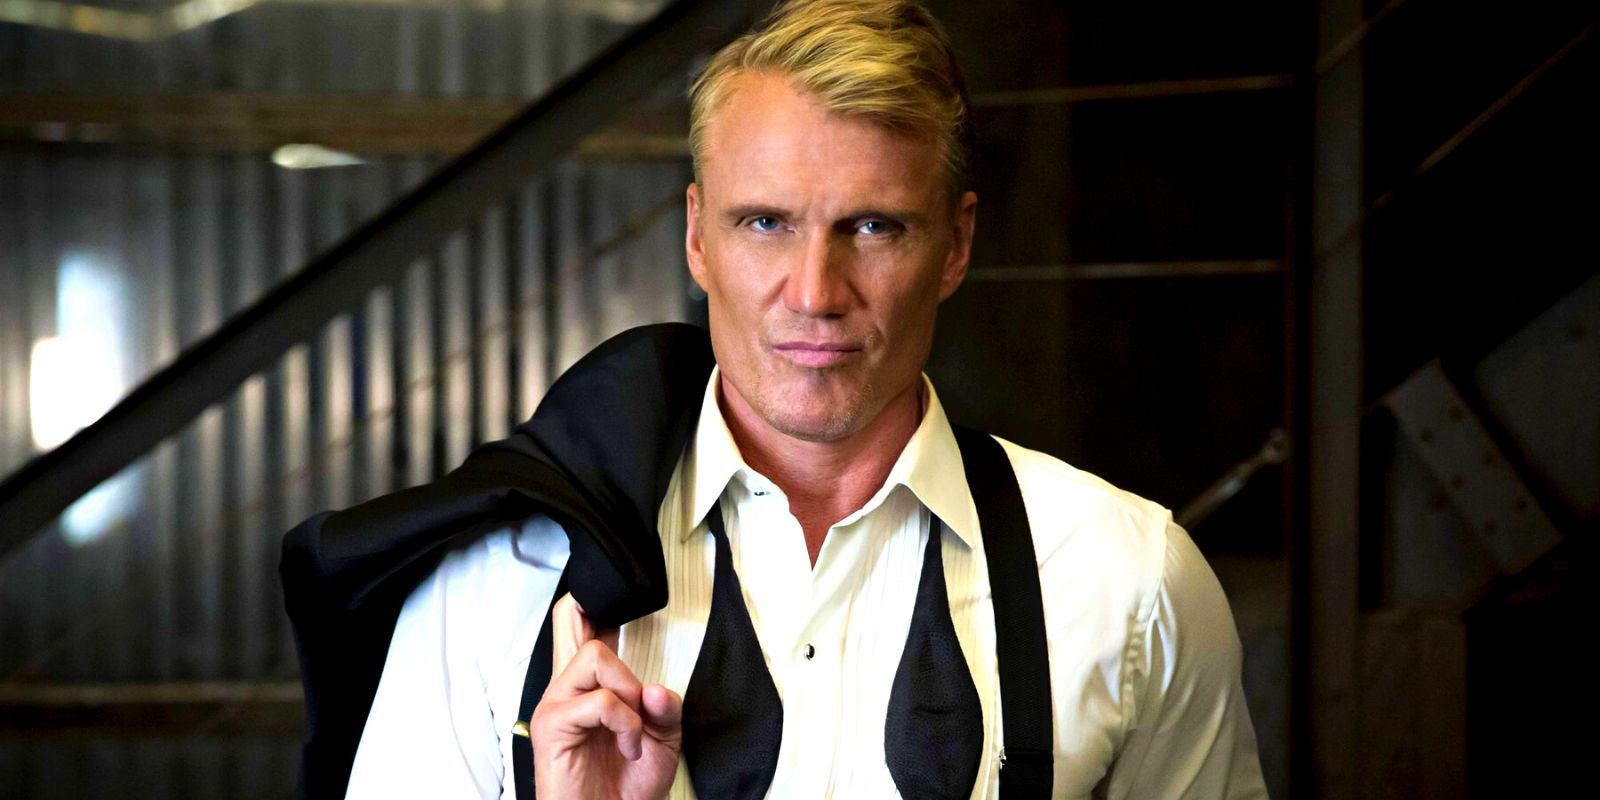 Dolph Lundgren in a tuxedo with his jacket draped over his shoulder and the bowtie undone